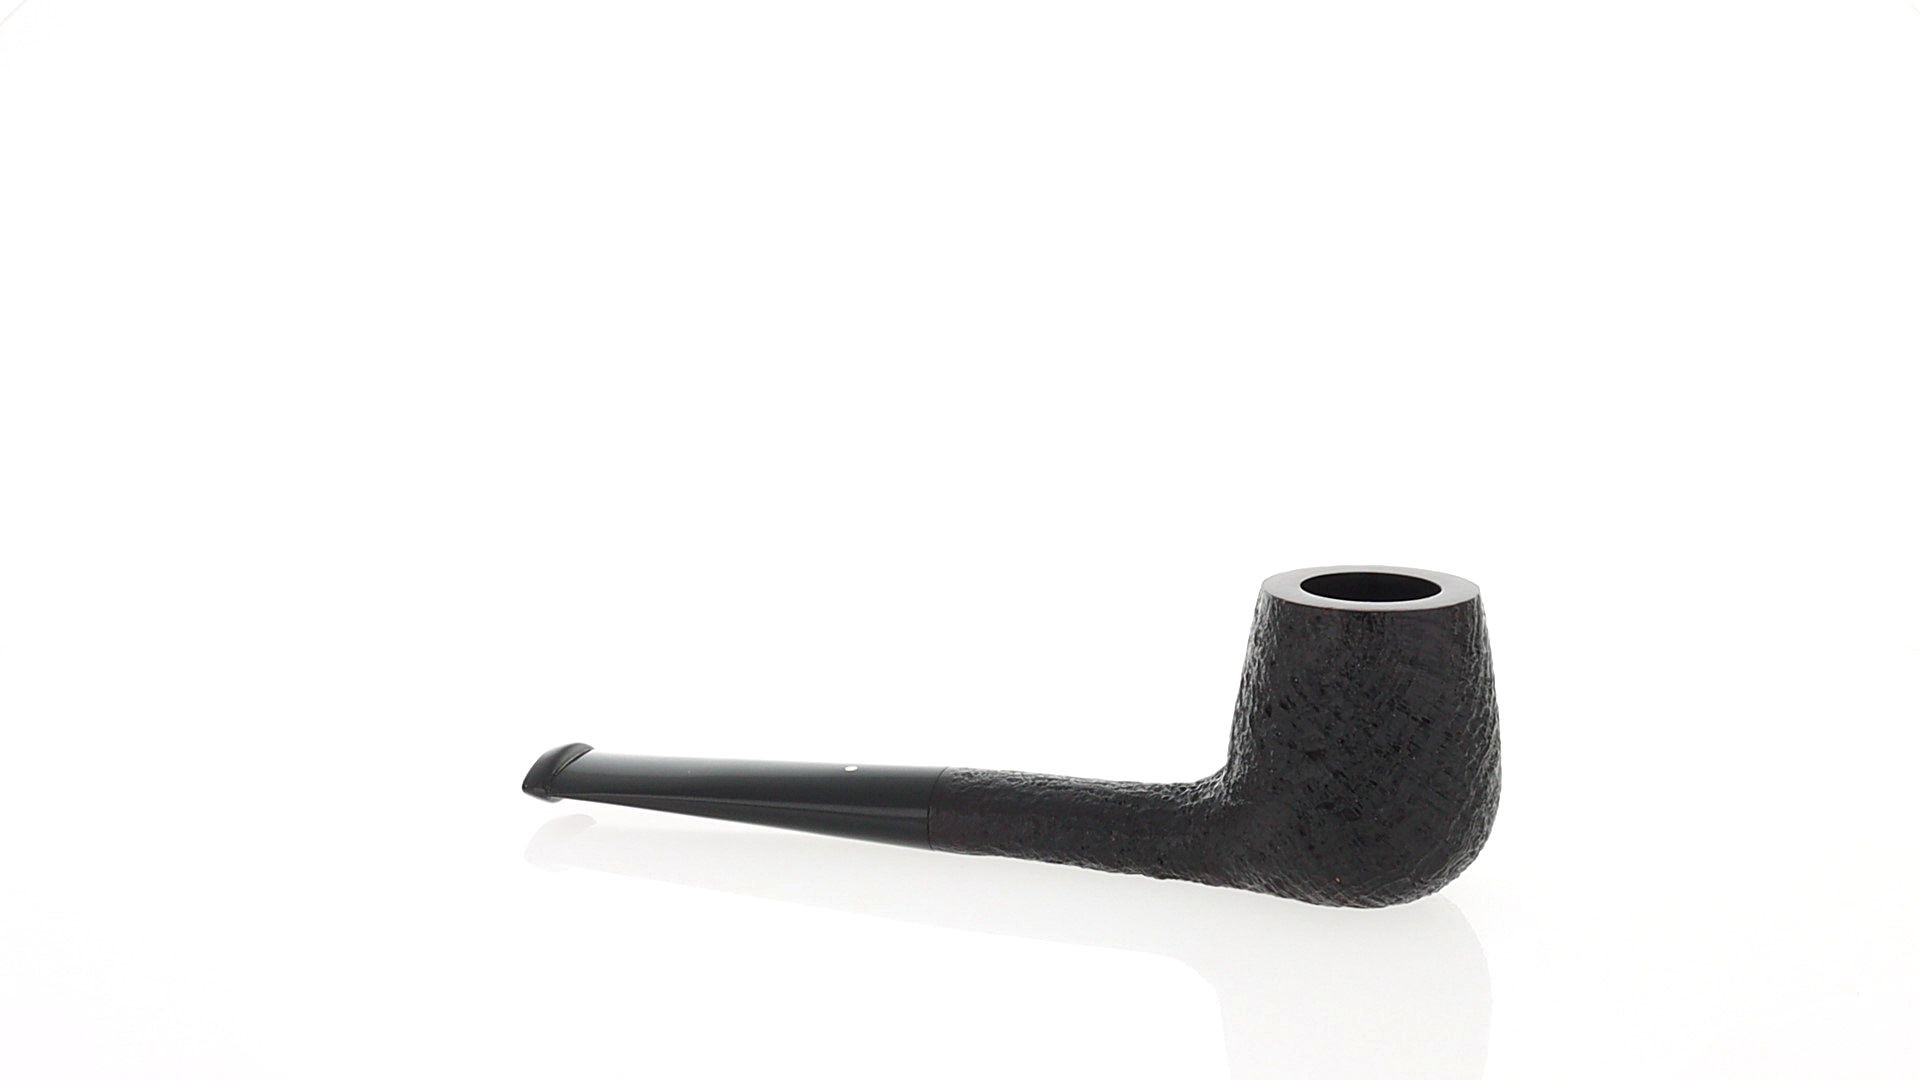 Pipe Dunhill Shell briar group 4 shape brandy